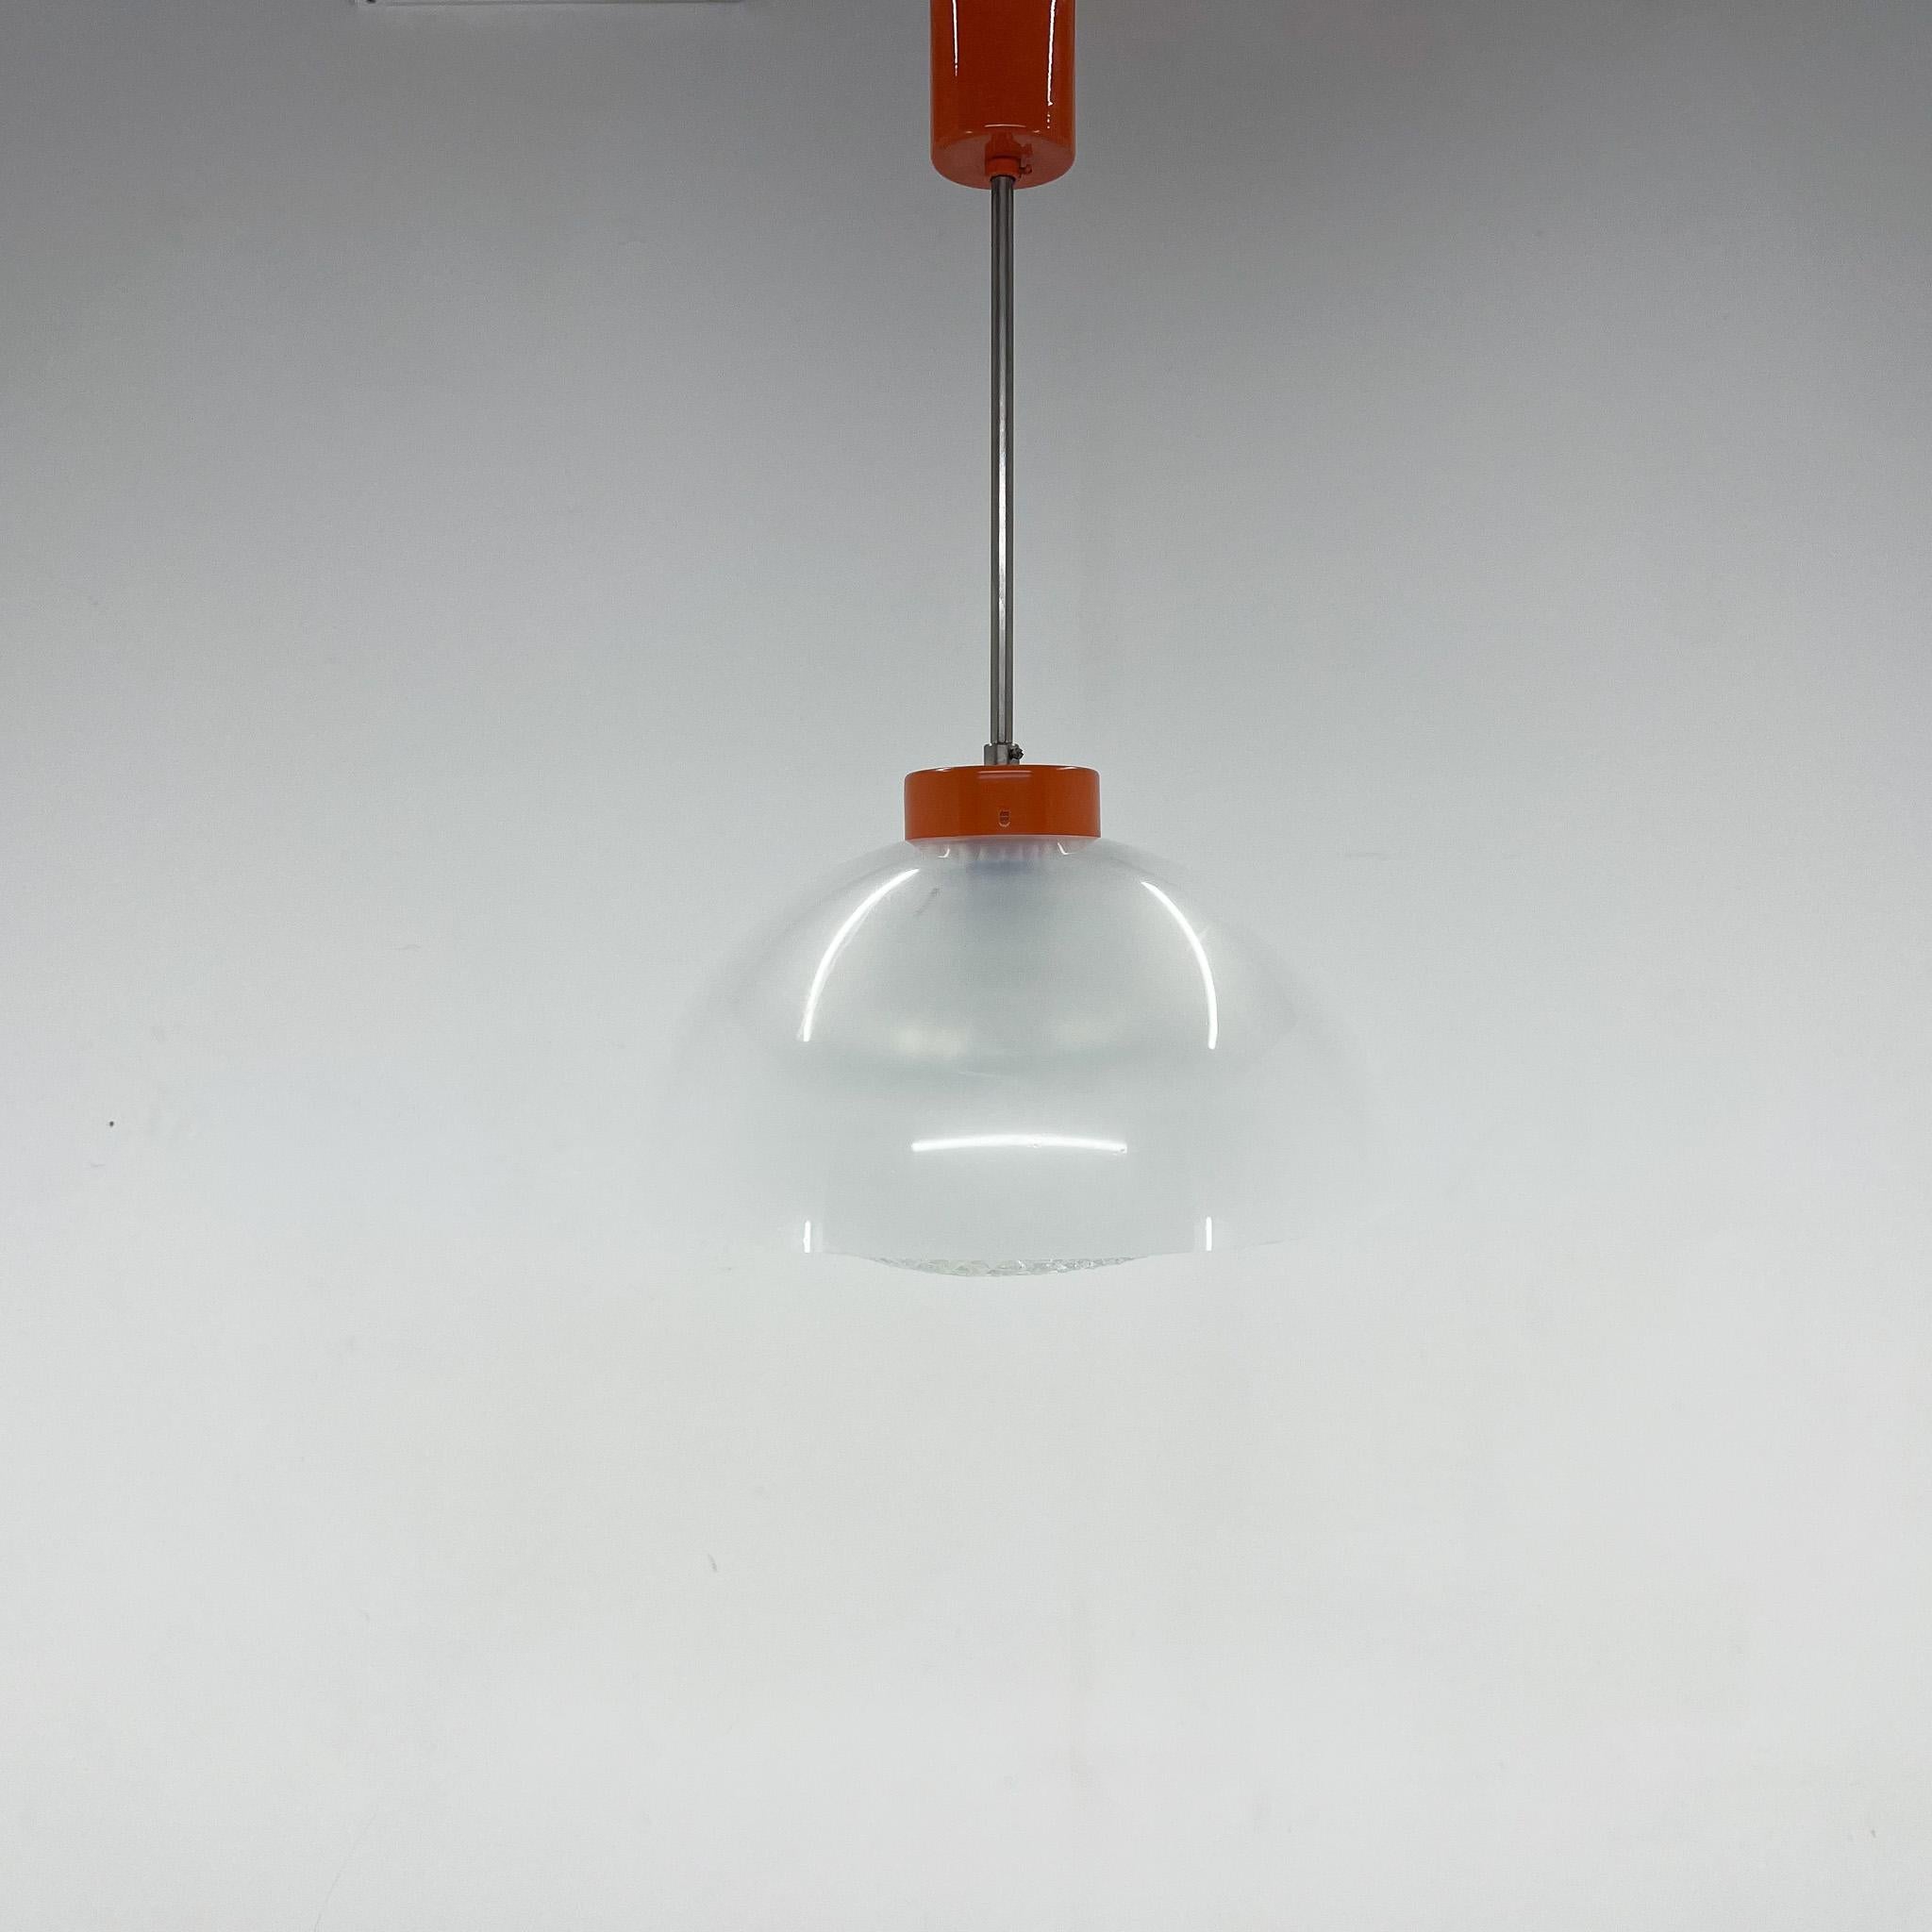 Vintage pendant made of transparent plastic and pressed glass.